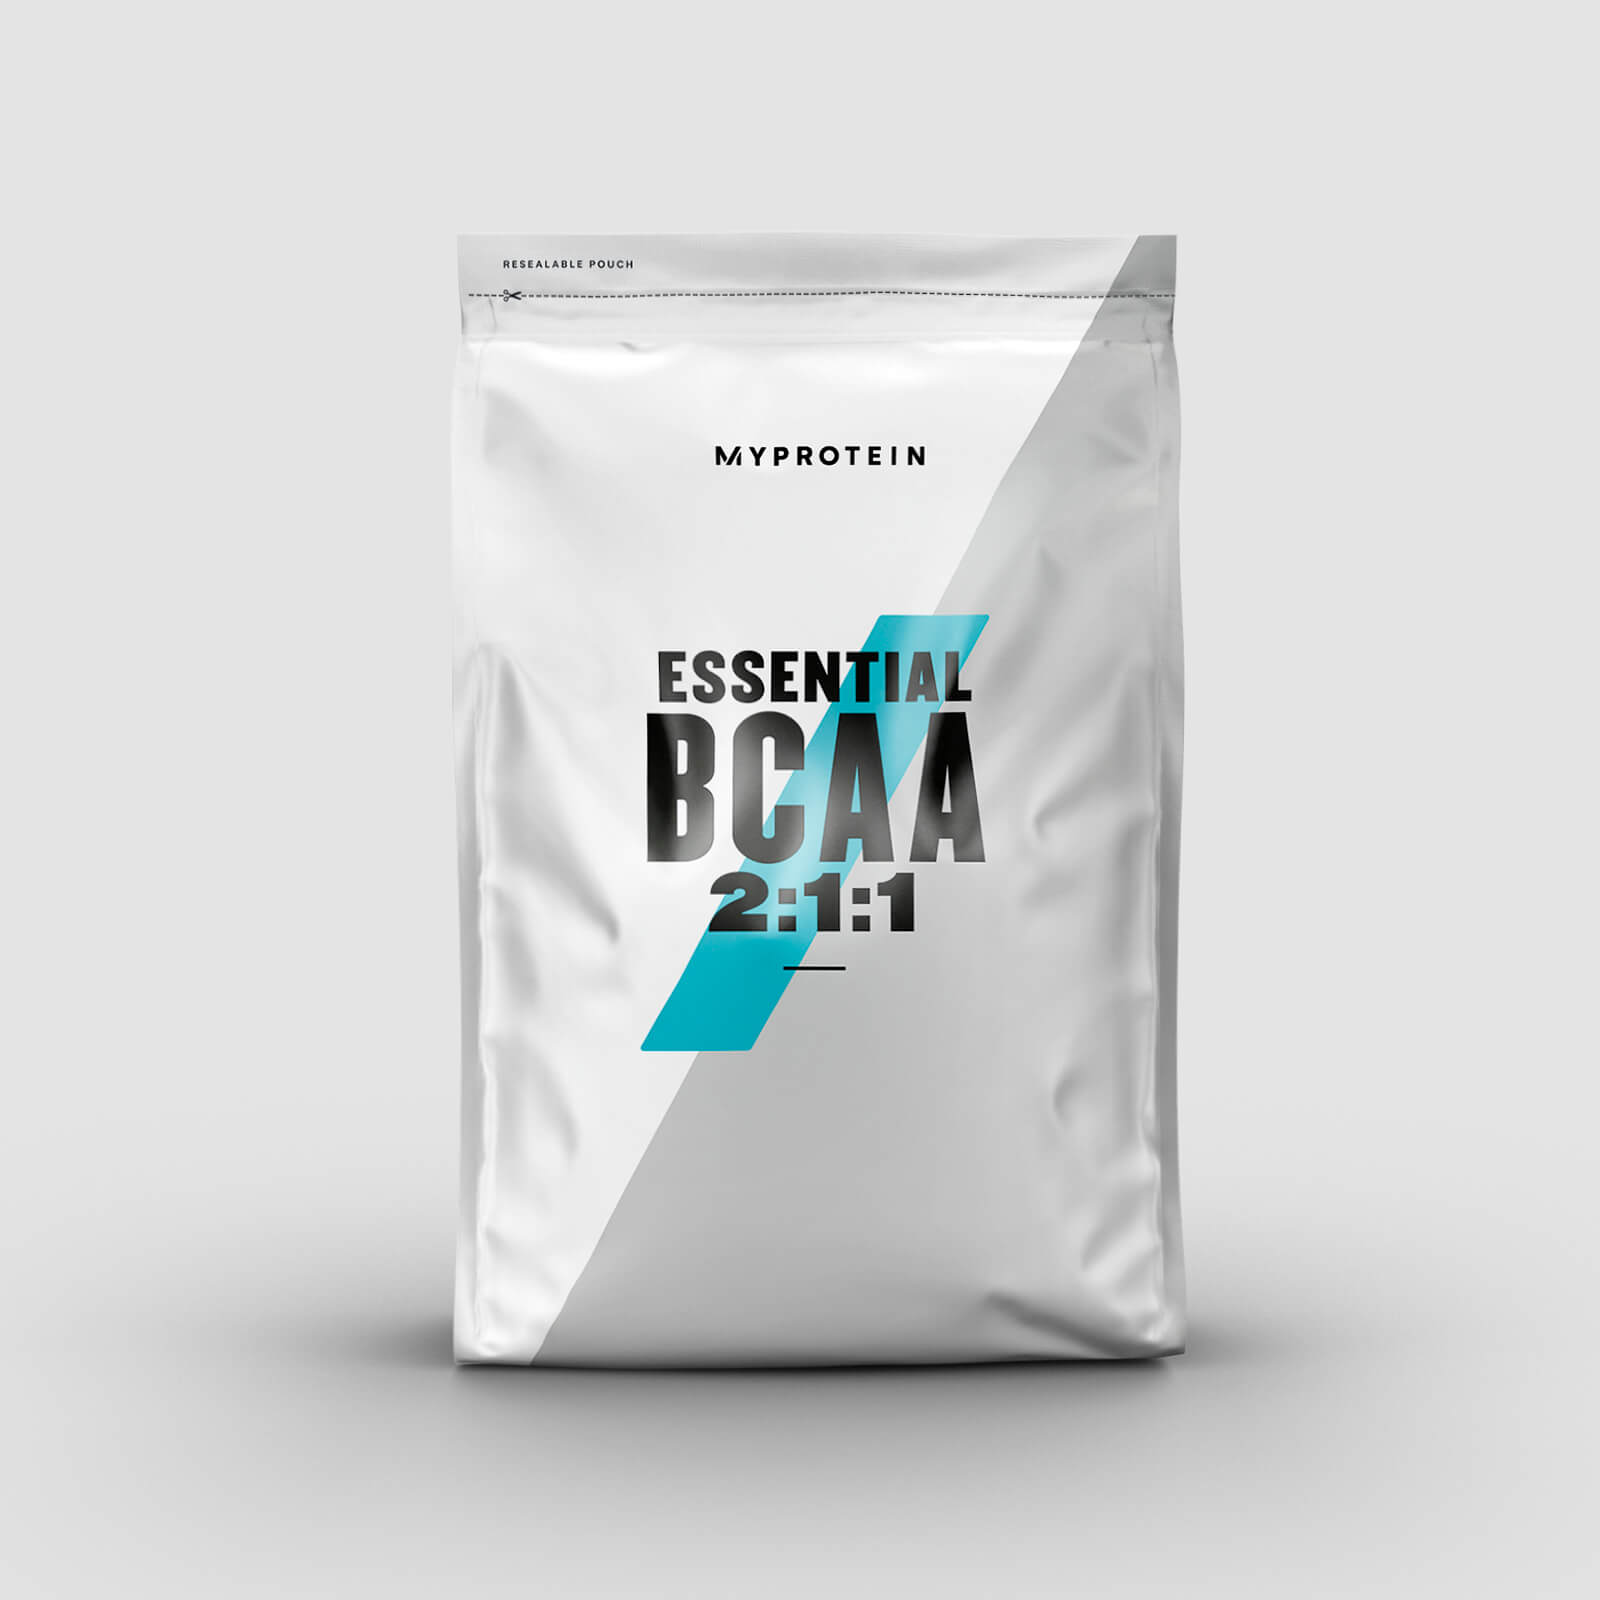 Myprotein Essential BCAA 2:1:1 - 250g - Gin and Tonic